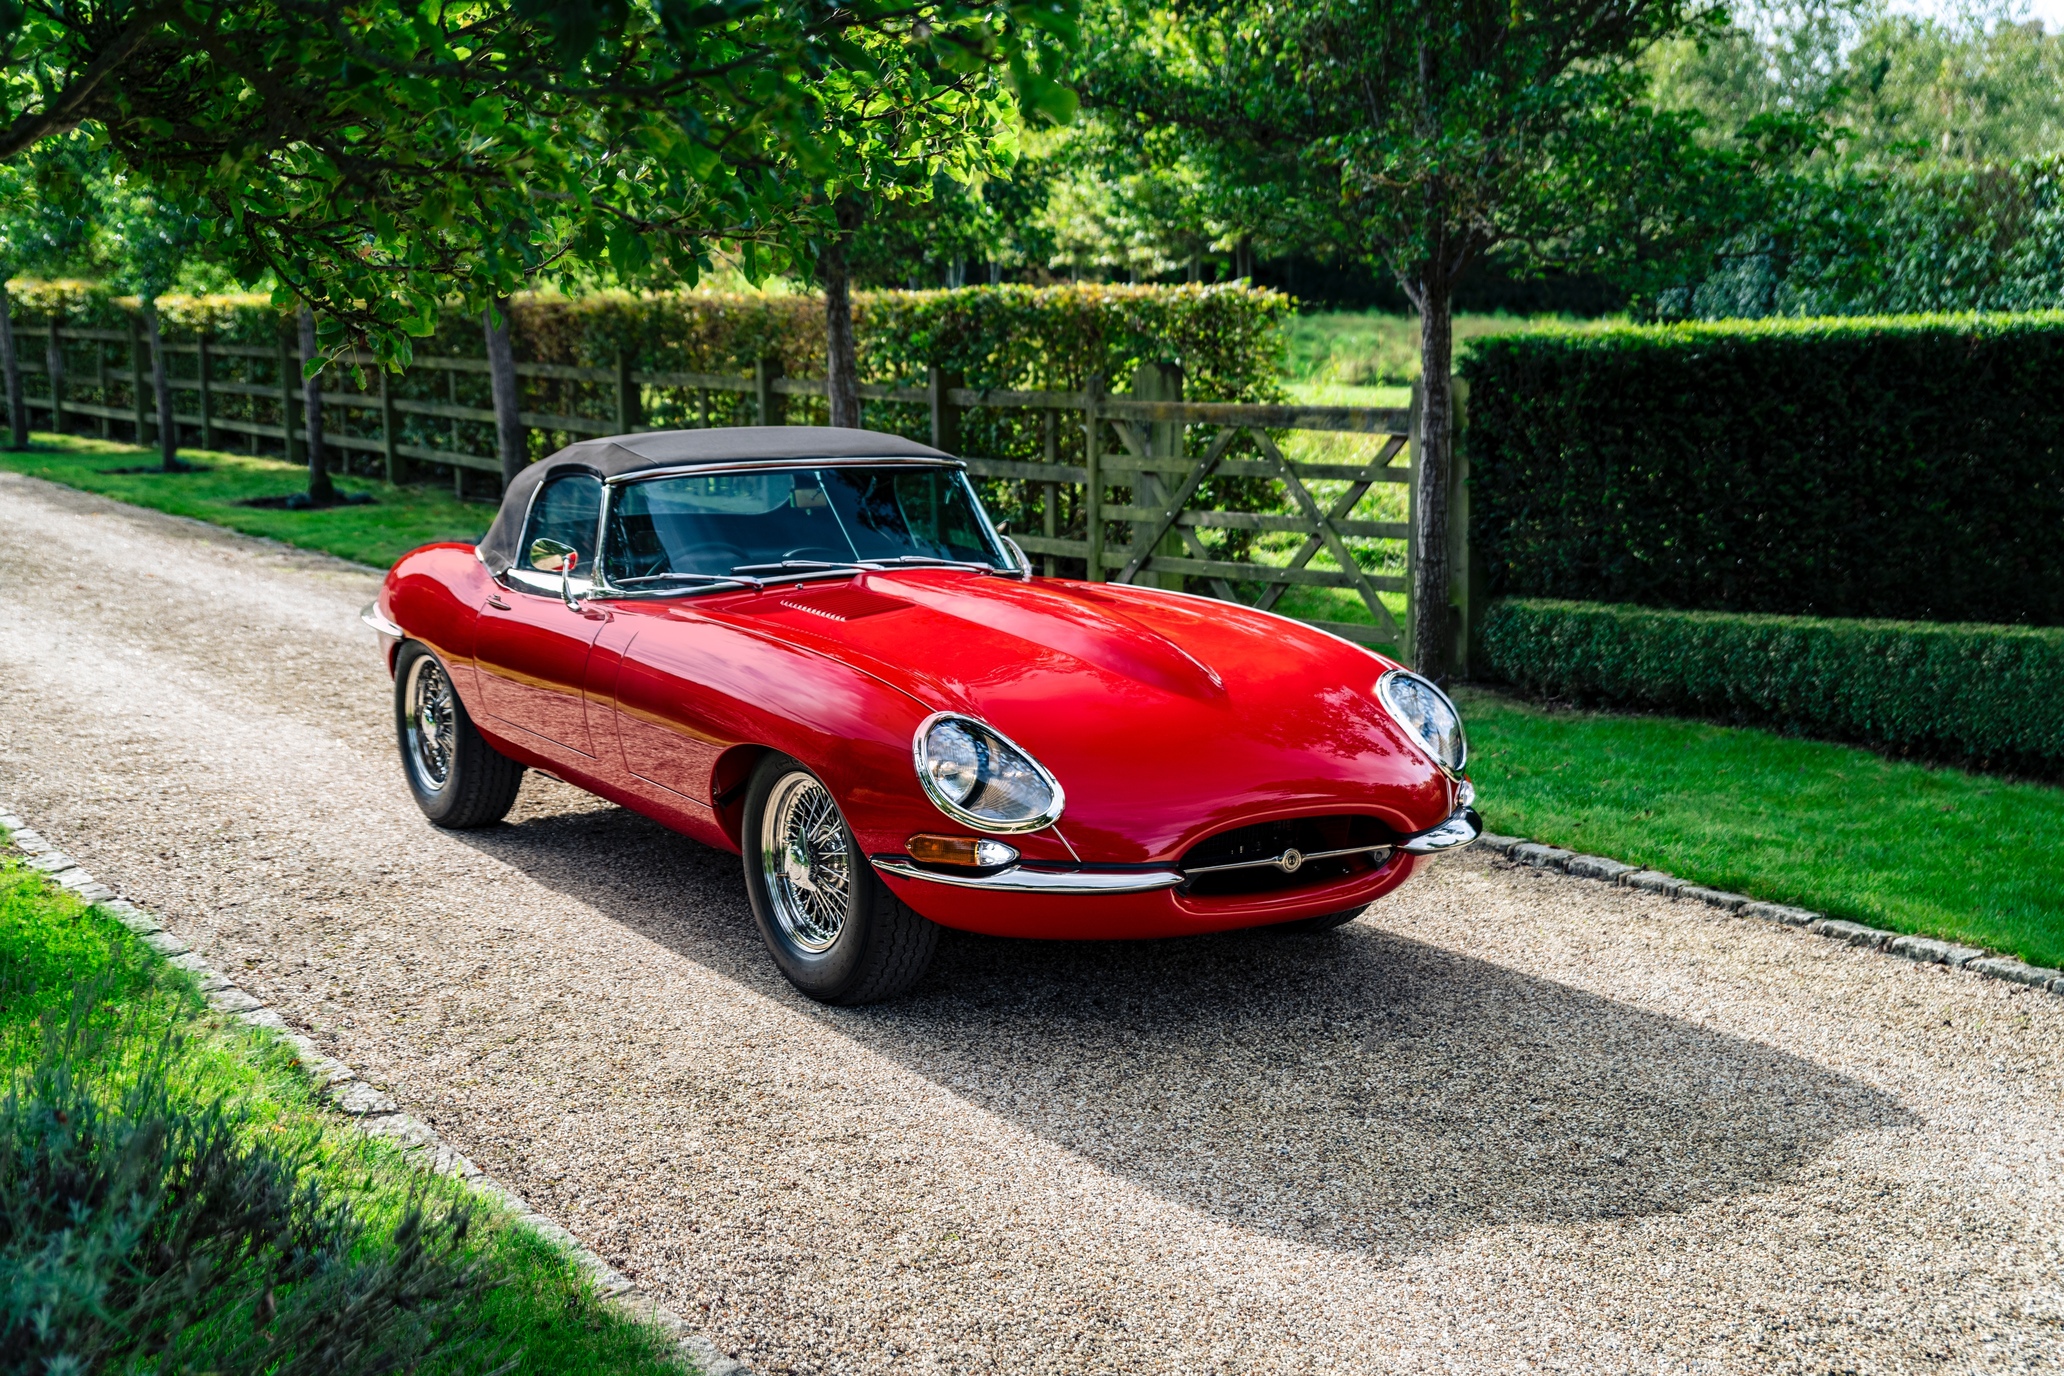 The Helm E-Type Roadster: an automotive icon reimagined